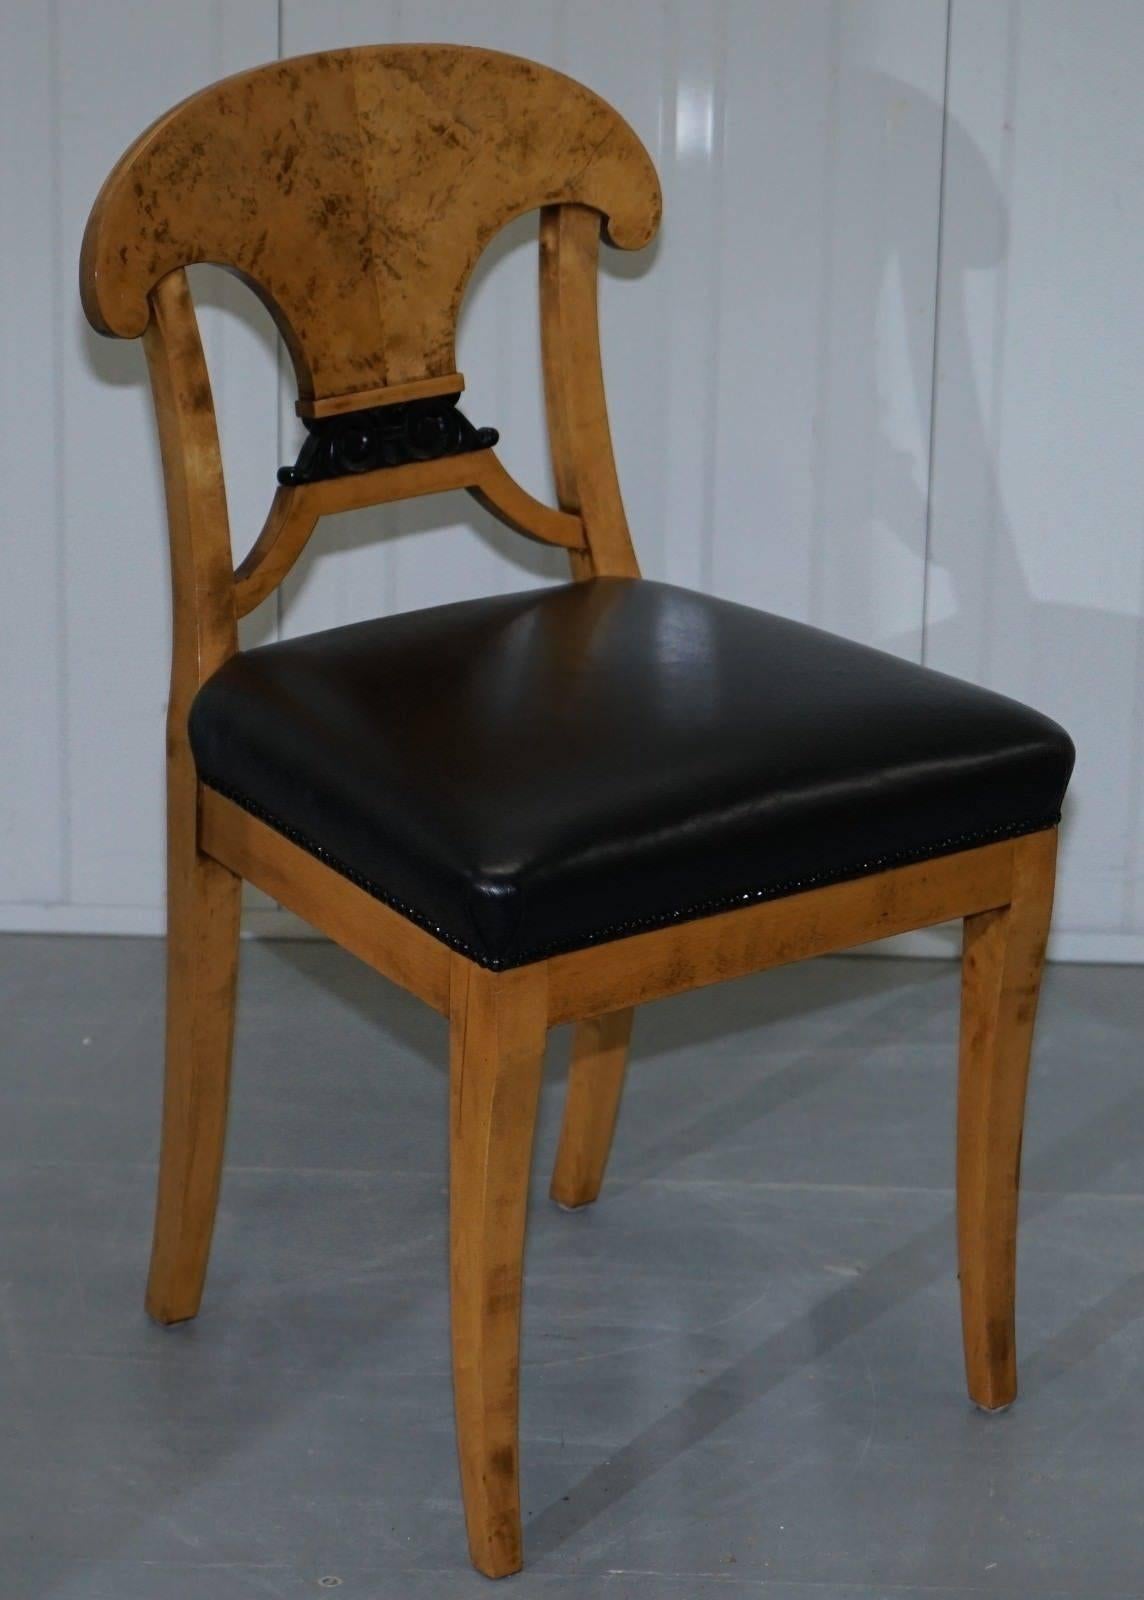 We are delighted to offer for sale this lovely pair of Swedish Biedermeier chairs

A very good looking and well-made pair, the timber patina puts these more in the art category for me, they just look simply to die for from every angle

We have